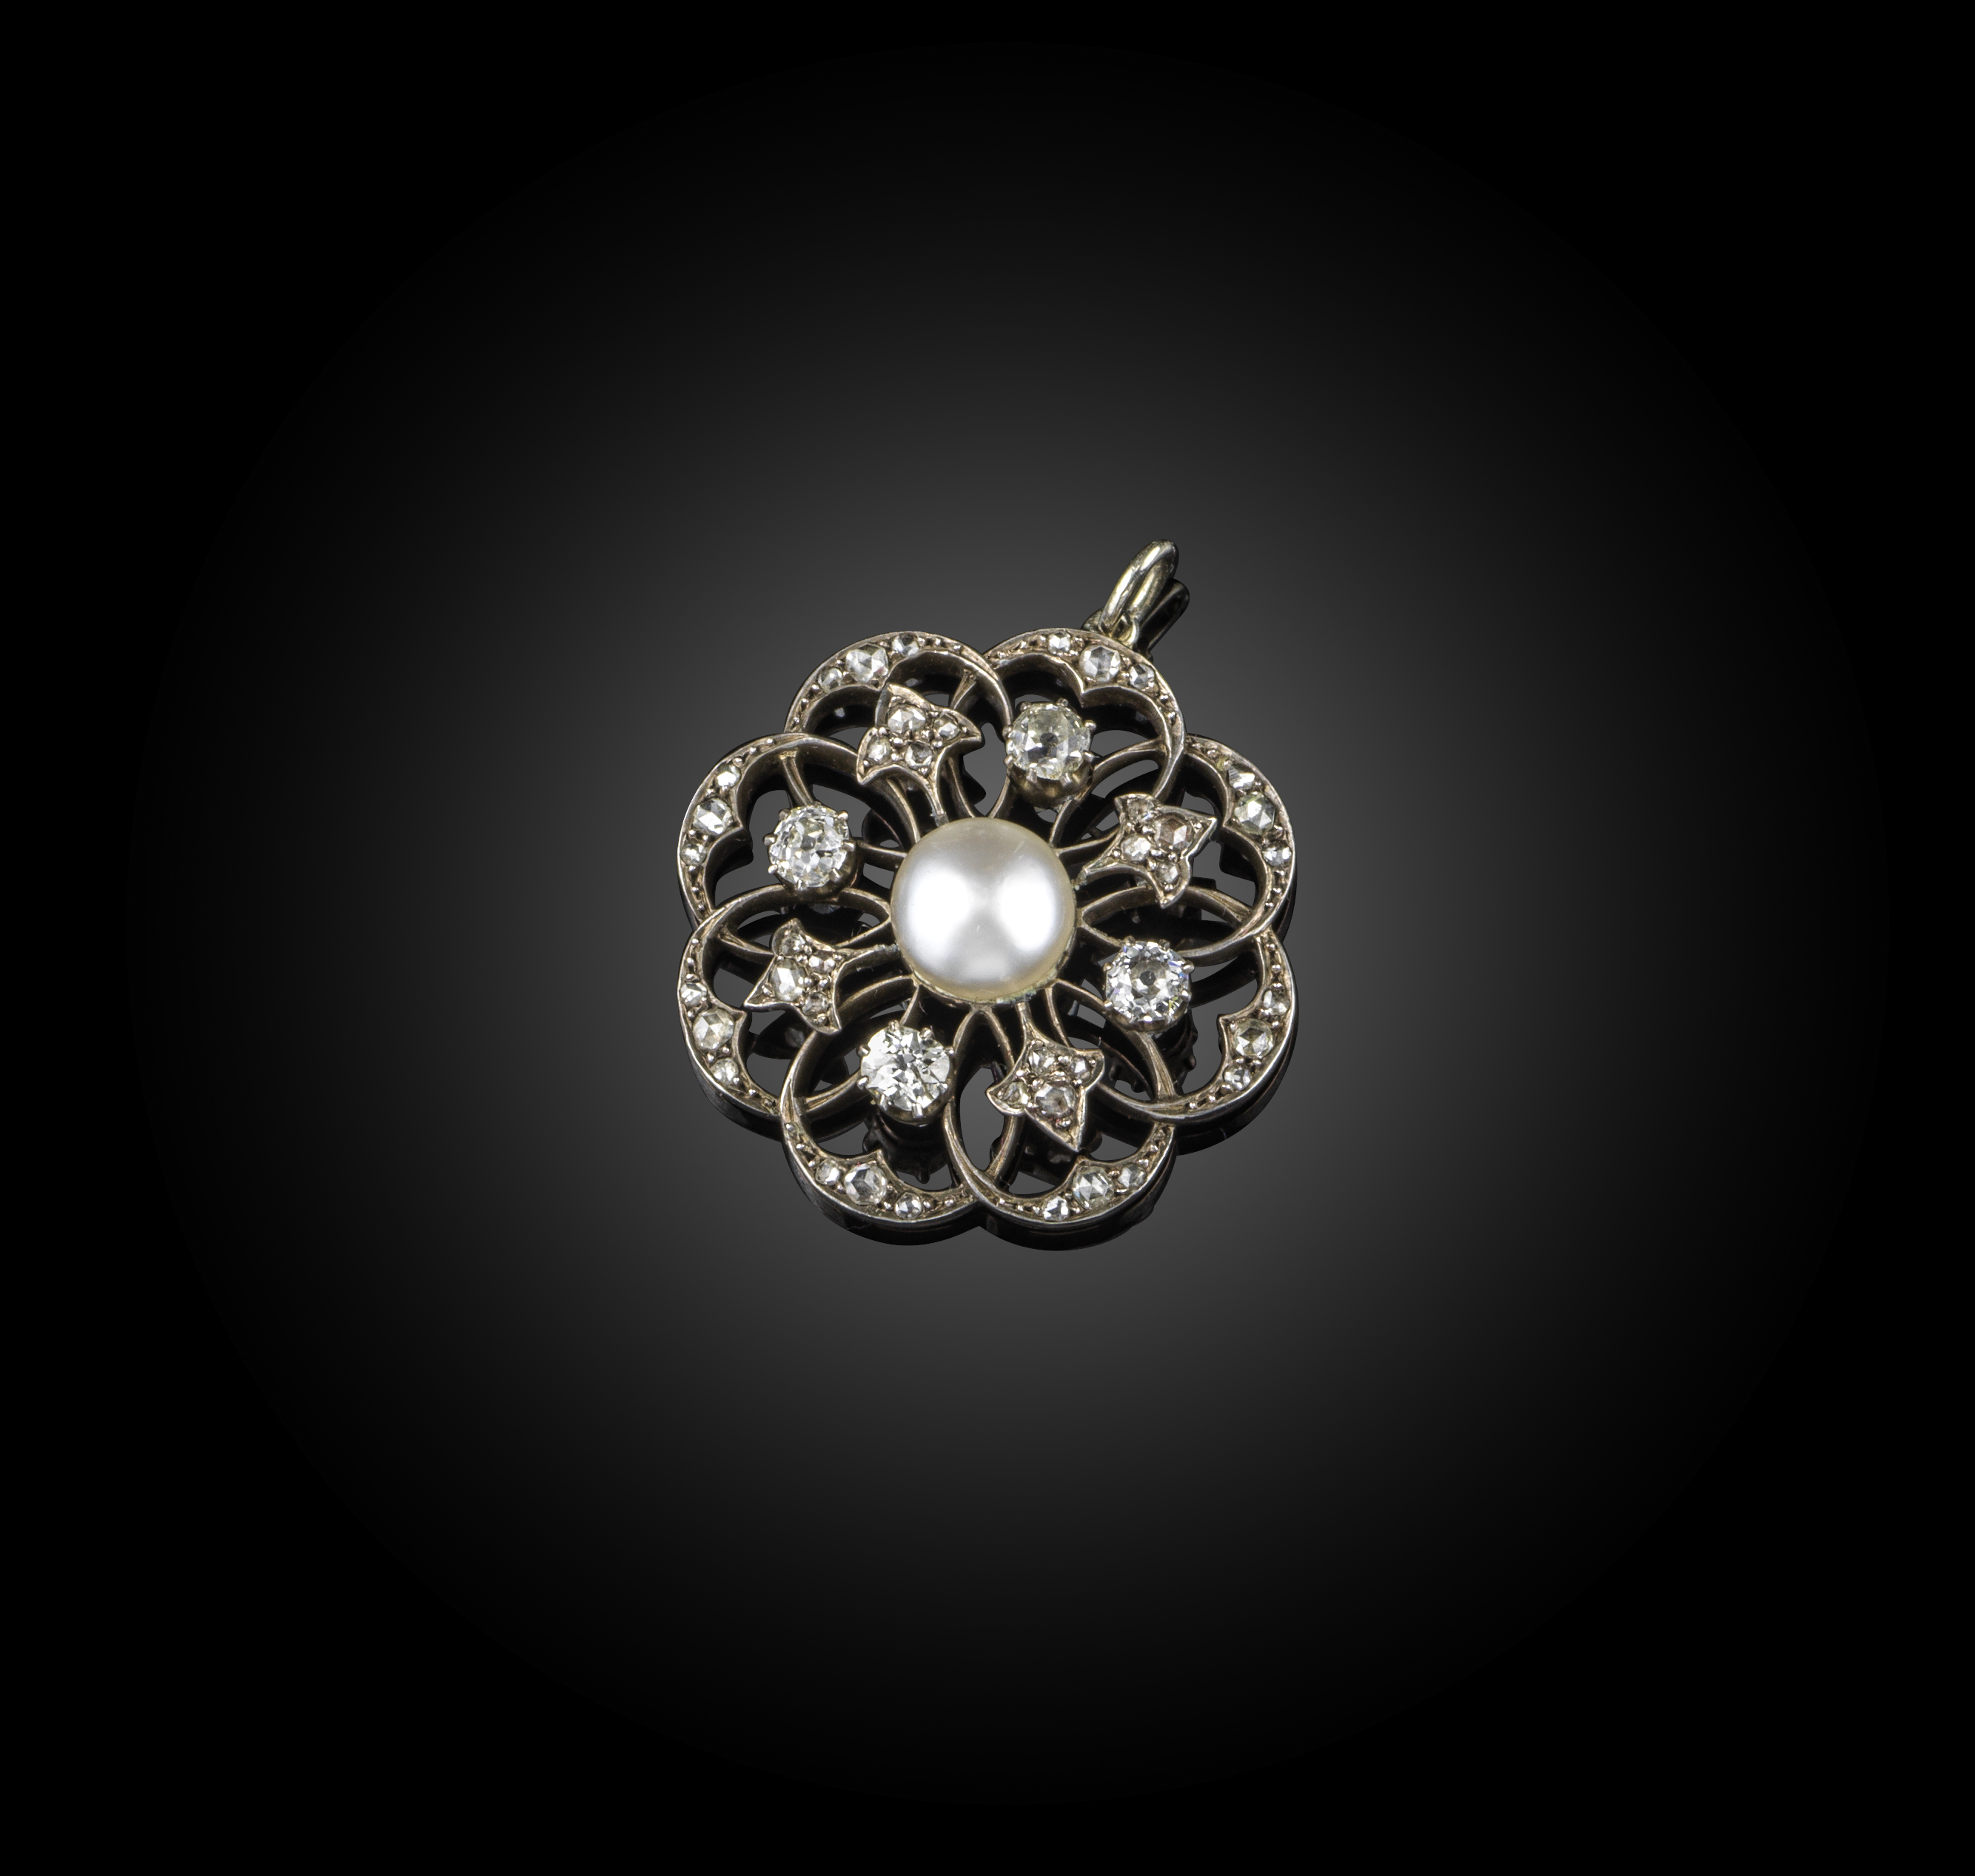 A natural pearl and diamond pendant, circa 1900, designed as an abstract open work flower,